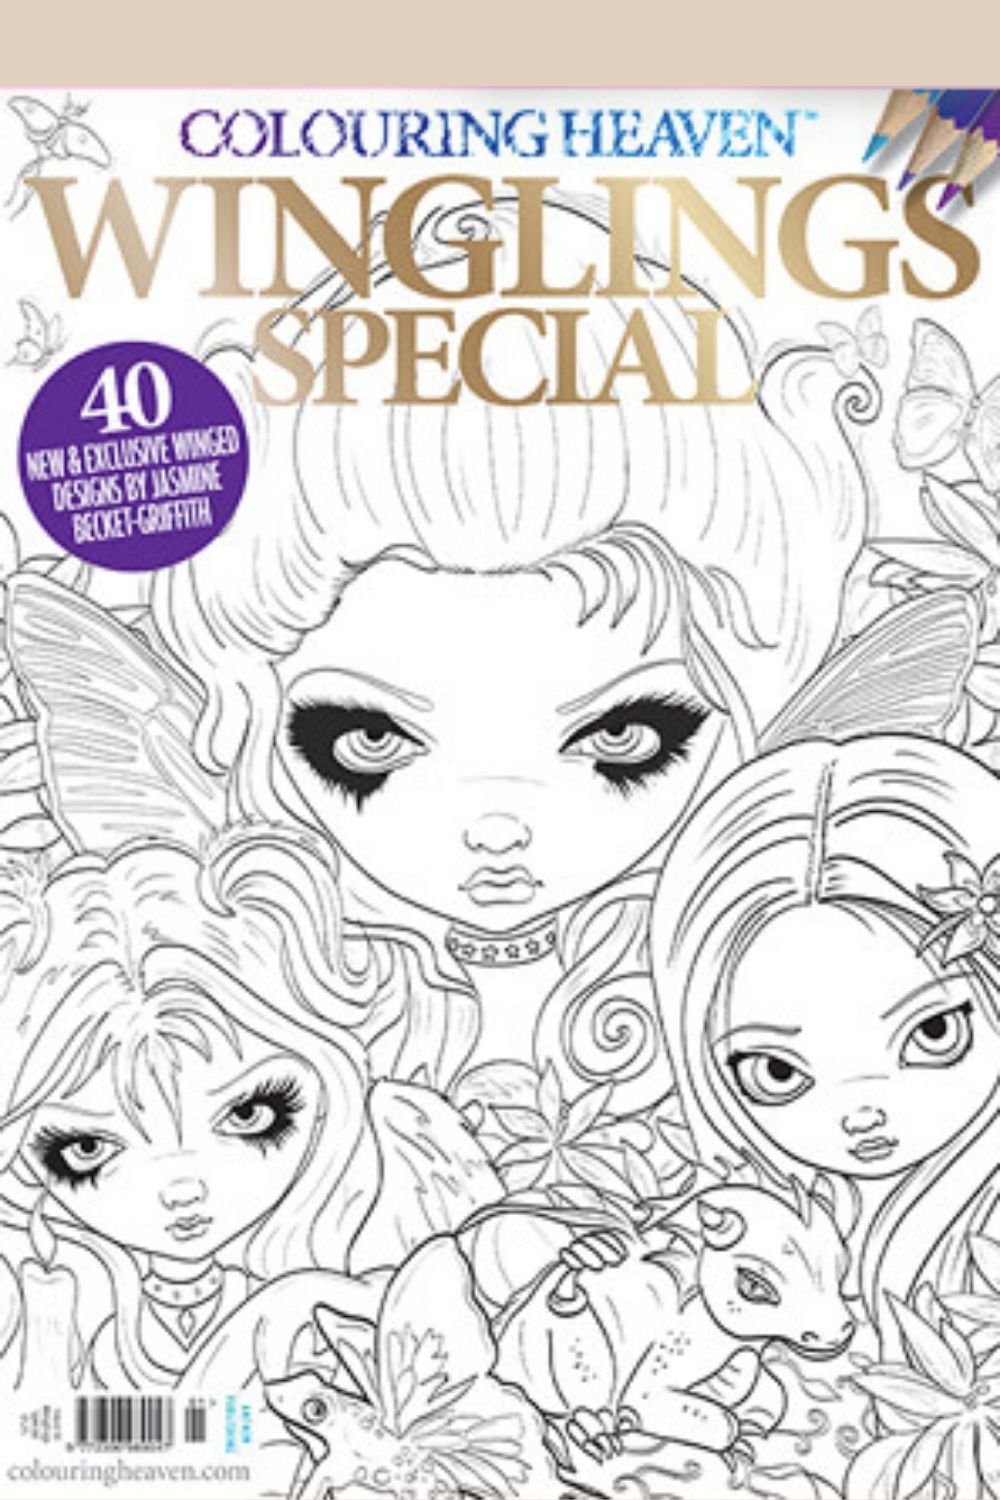 Colouring Heaven Magazine - Winglings Special